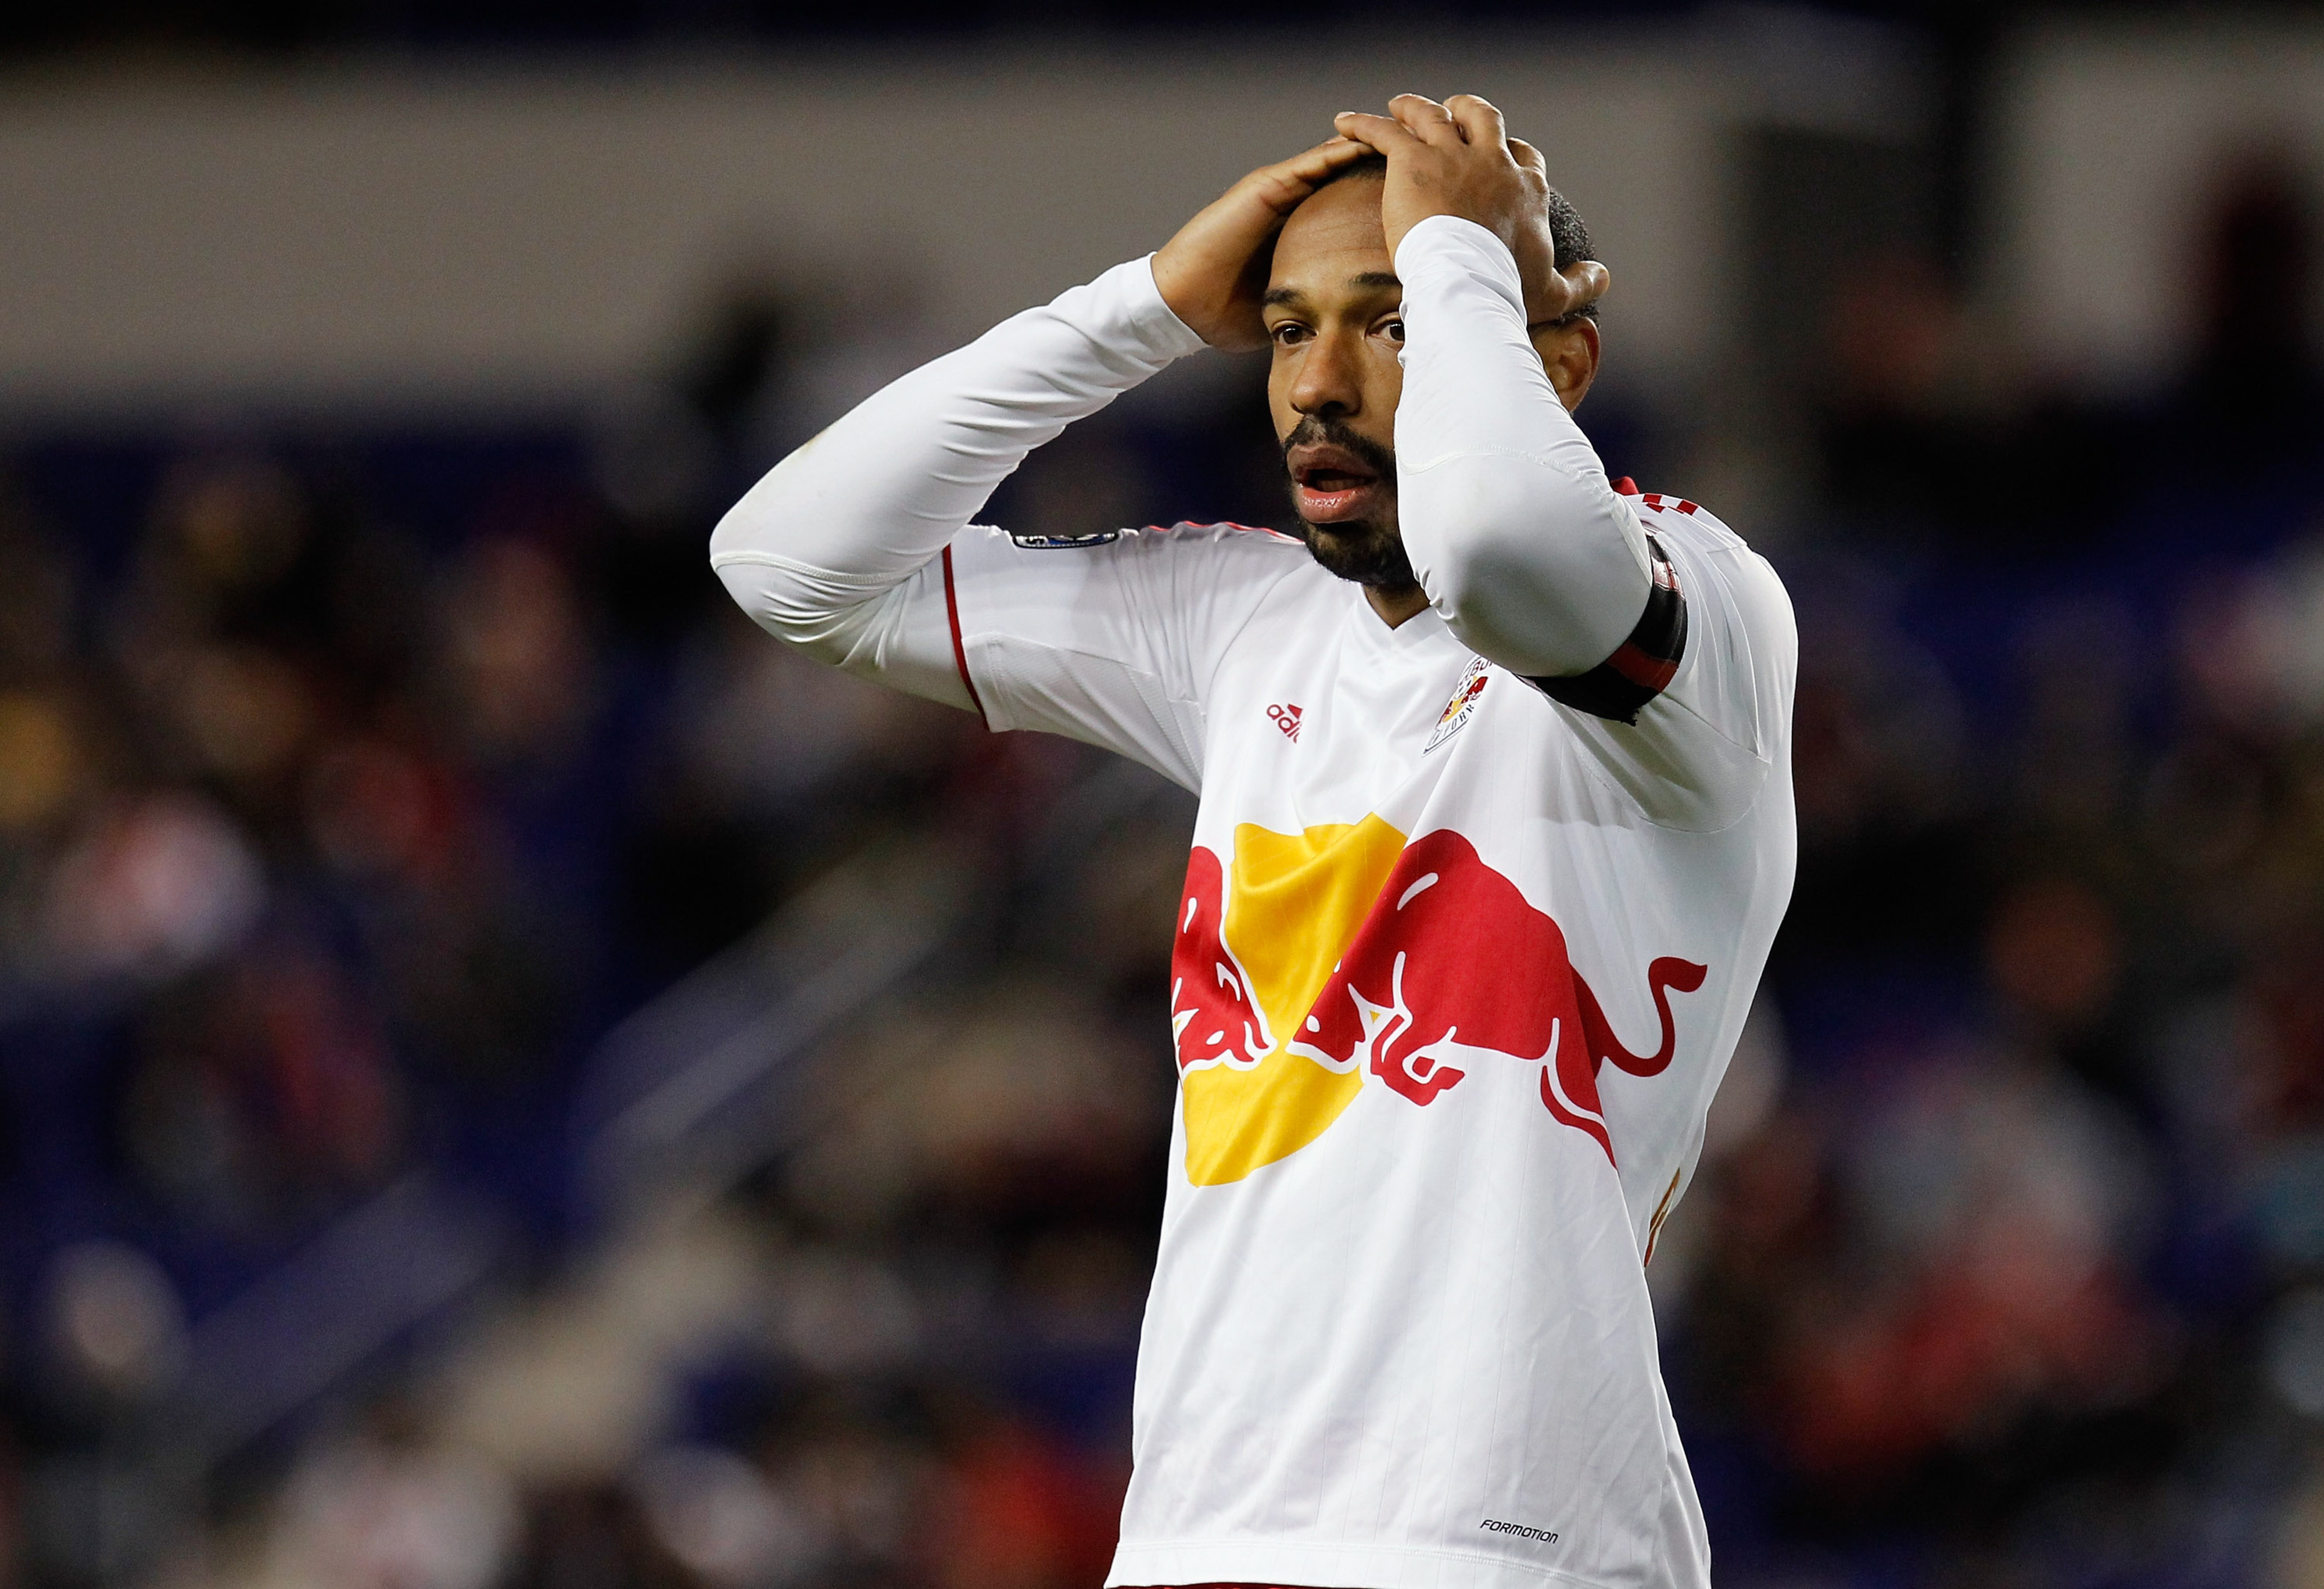 Thierry Henry was one of the culprits in the Red Bulls' 1-0 loss to DC United Thursday night.